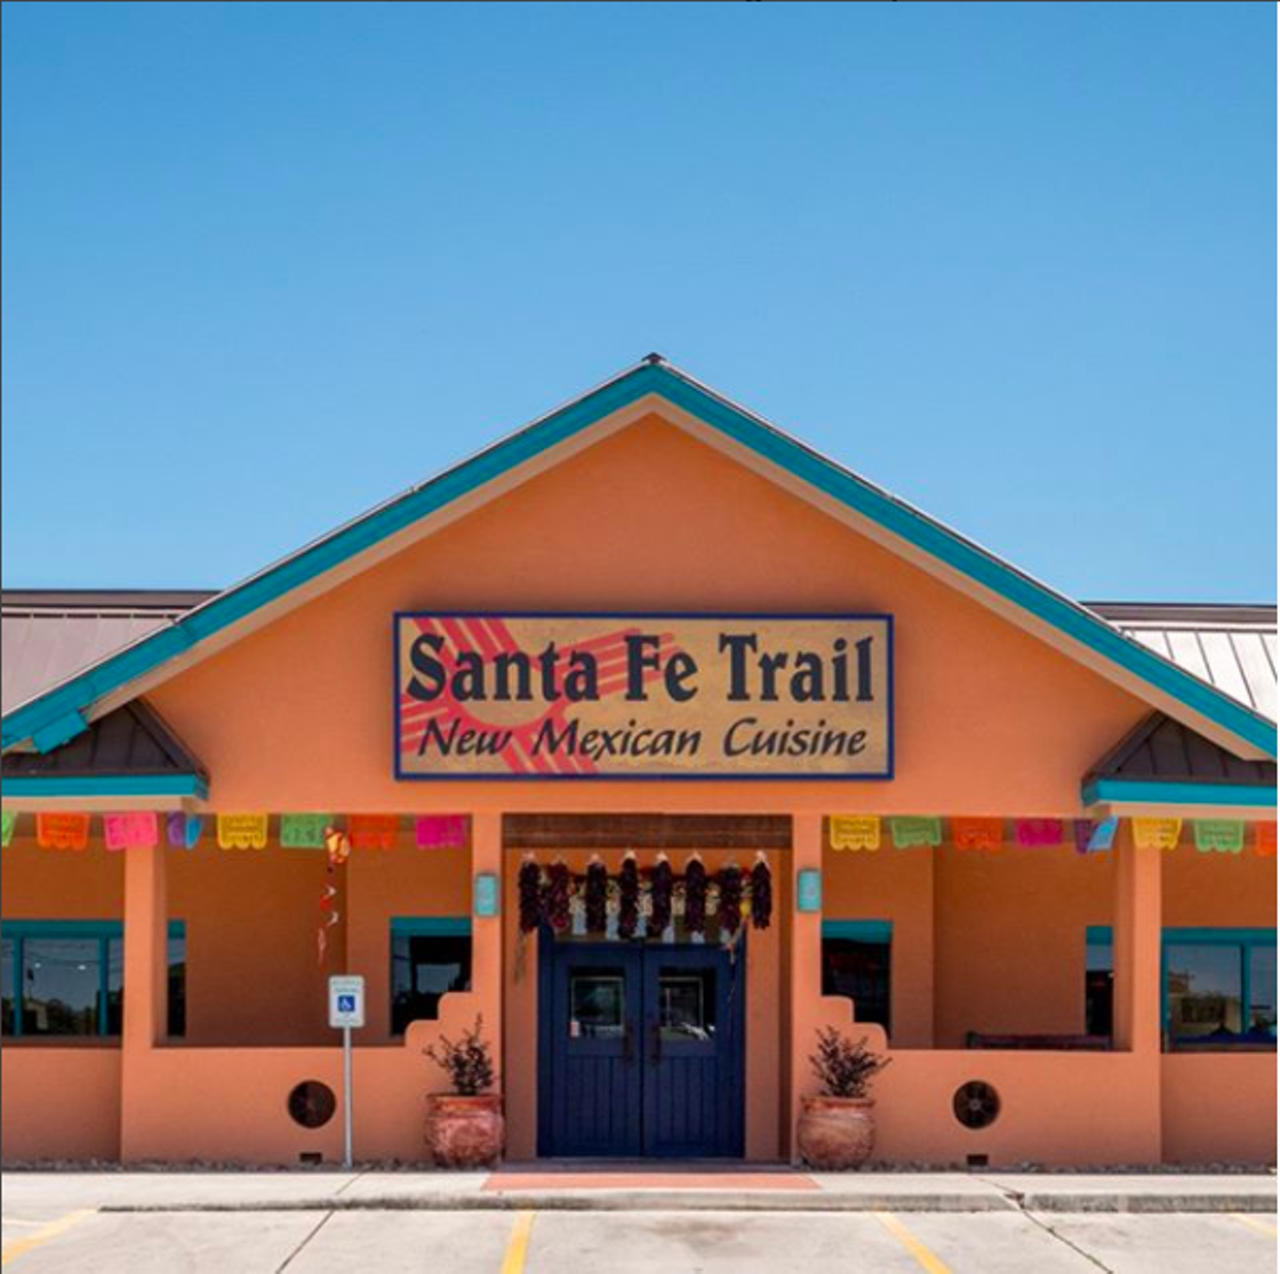 Santa Fe Trail New Mexican Restaurant
16080 San Pedro Ave
After just a year in business, Sante Fe Trail closed its doors this June.
Photo via Instagram / santafetrailcuisine